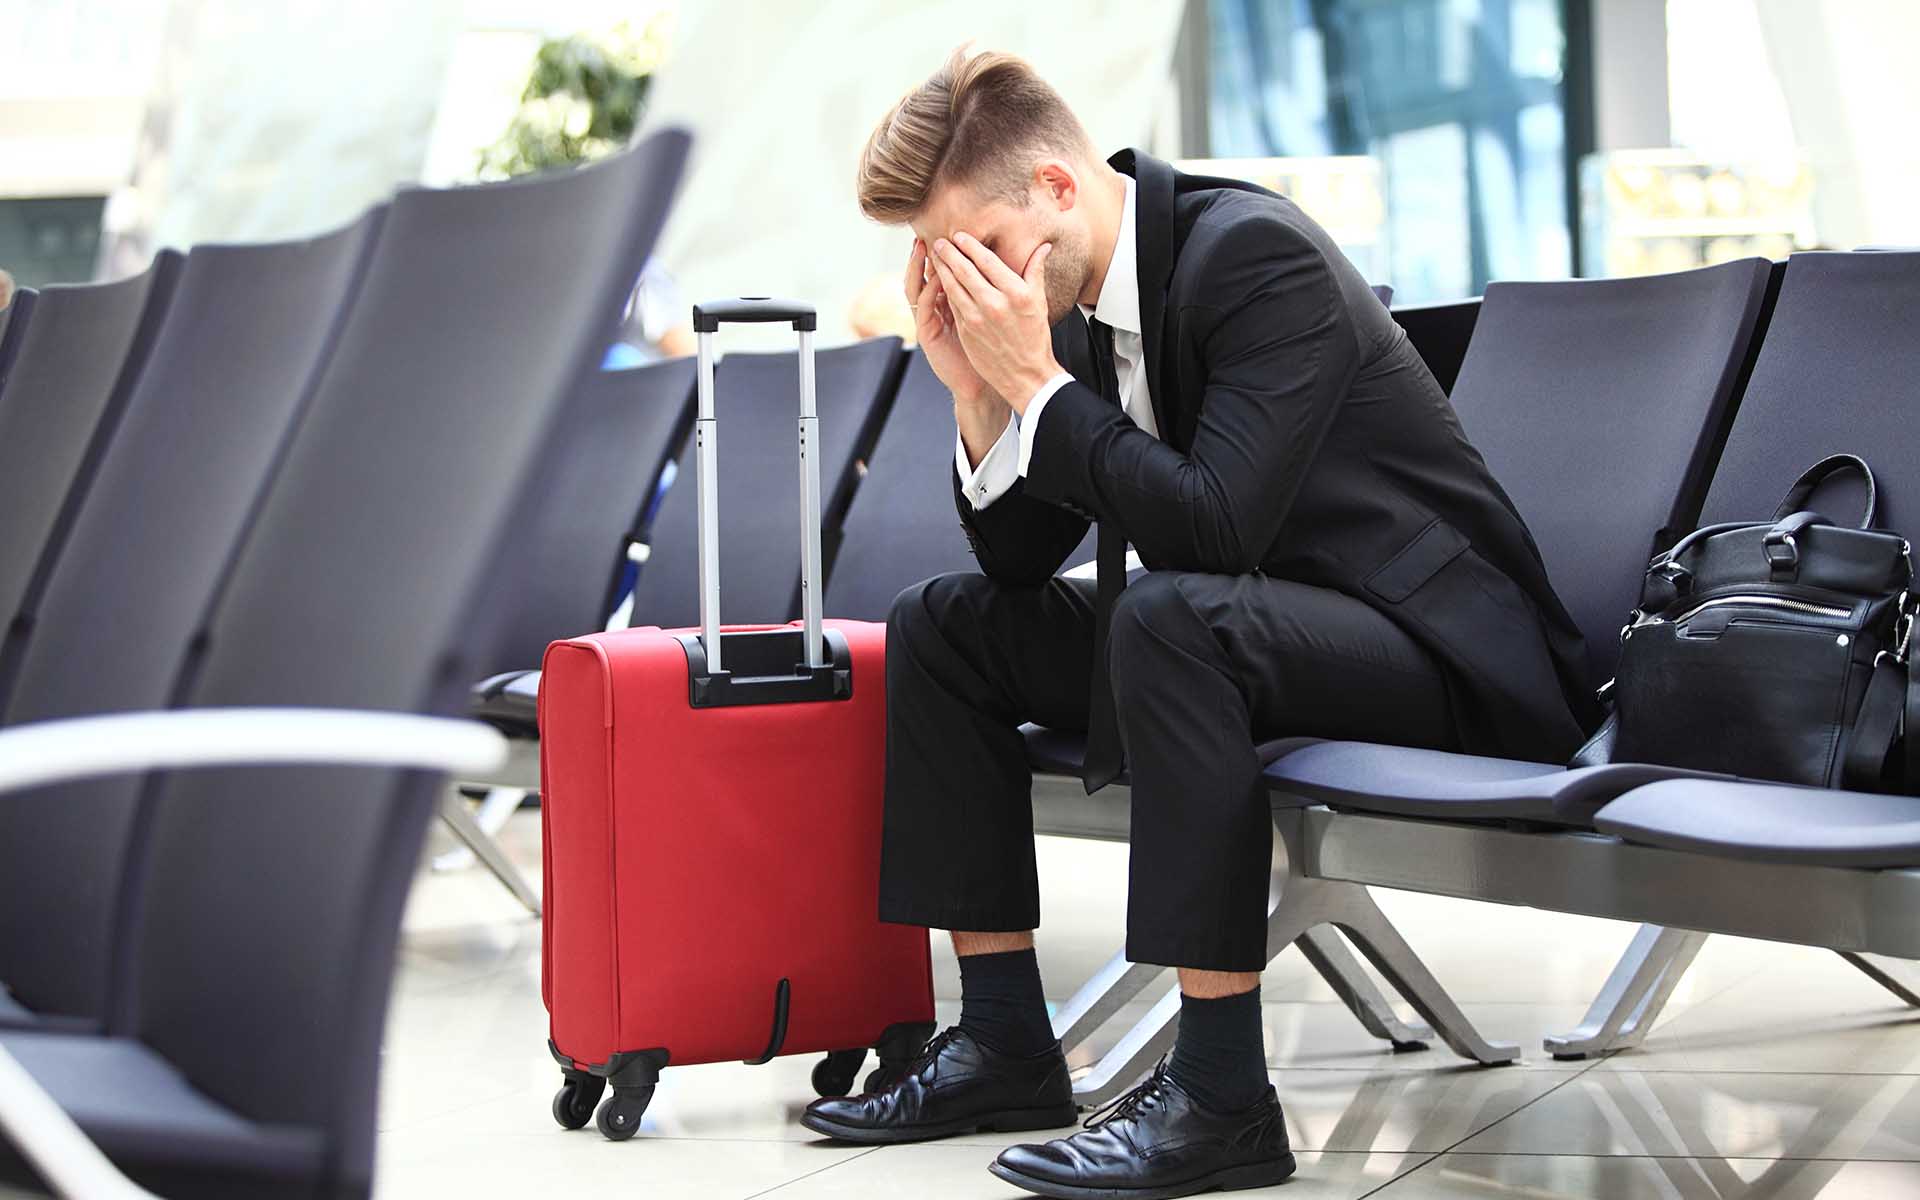 Current Problems Plaguing the Travel Booking Industry